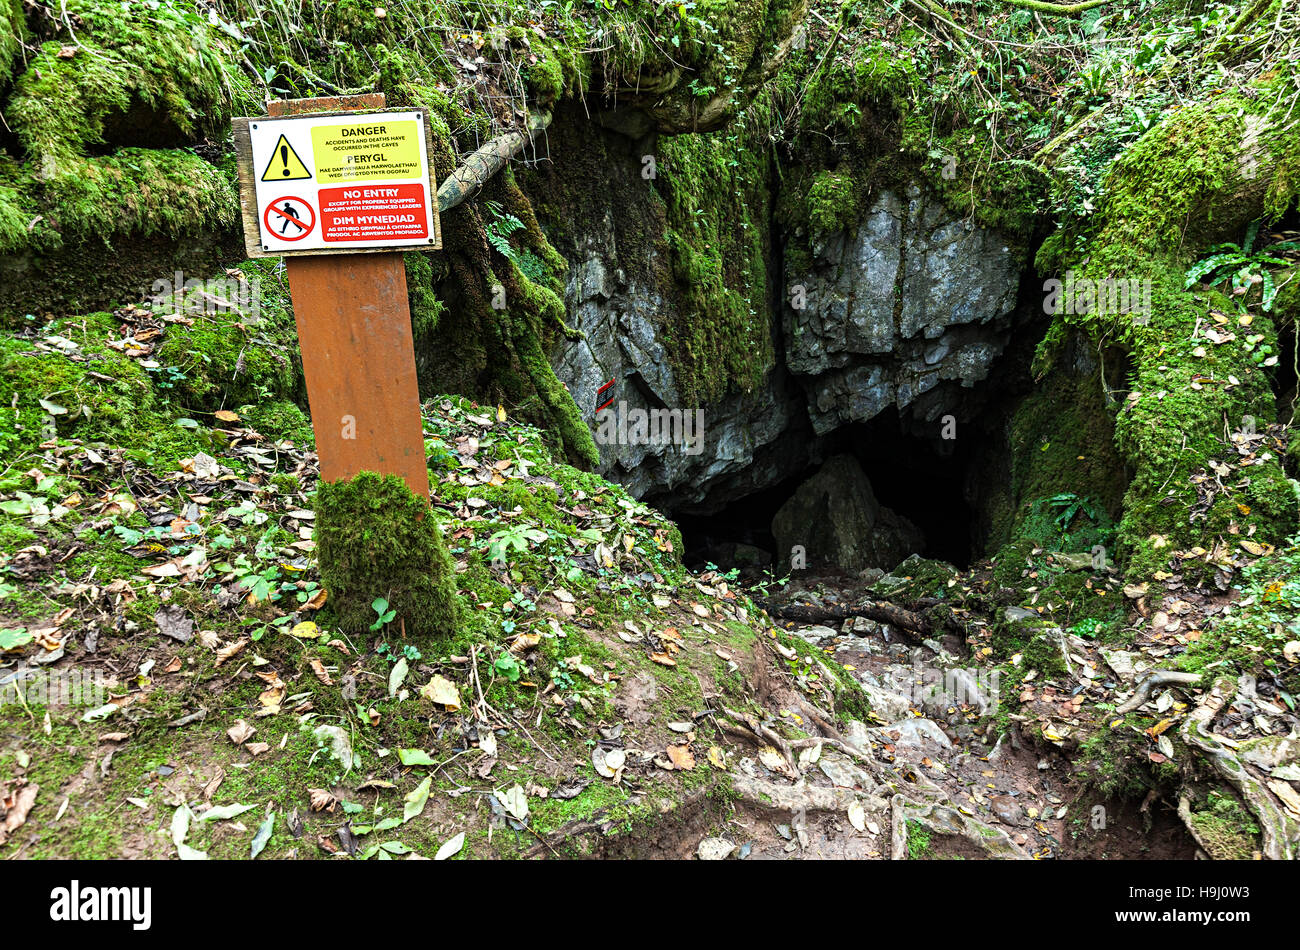 Warning sign at entrance to Porth yr Ogof, a cave in the Brecon Beacons national park, Wales, UK Stock Photo